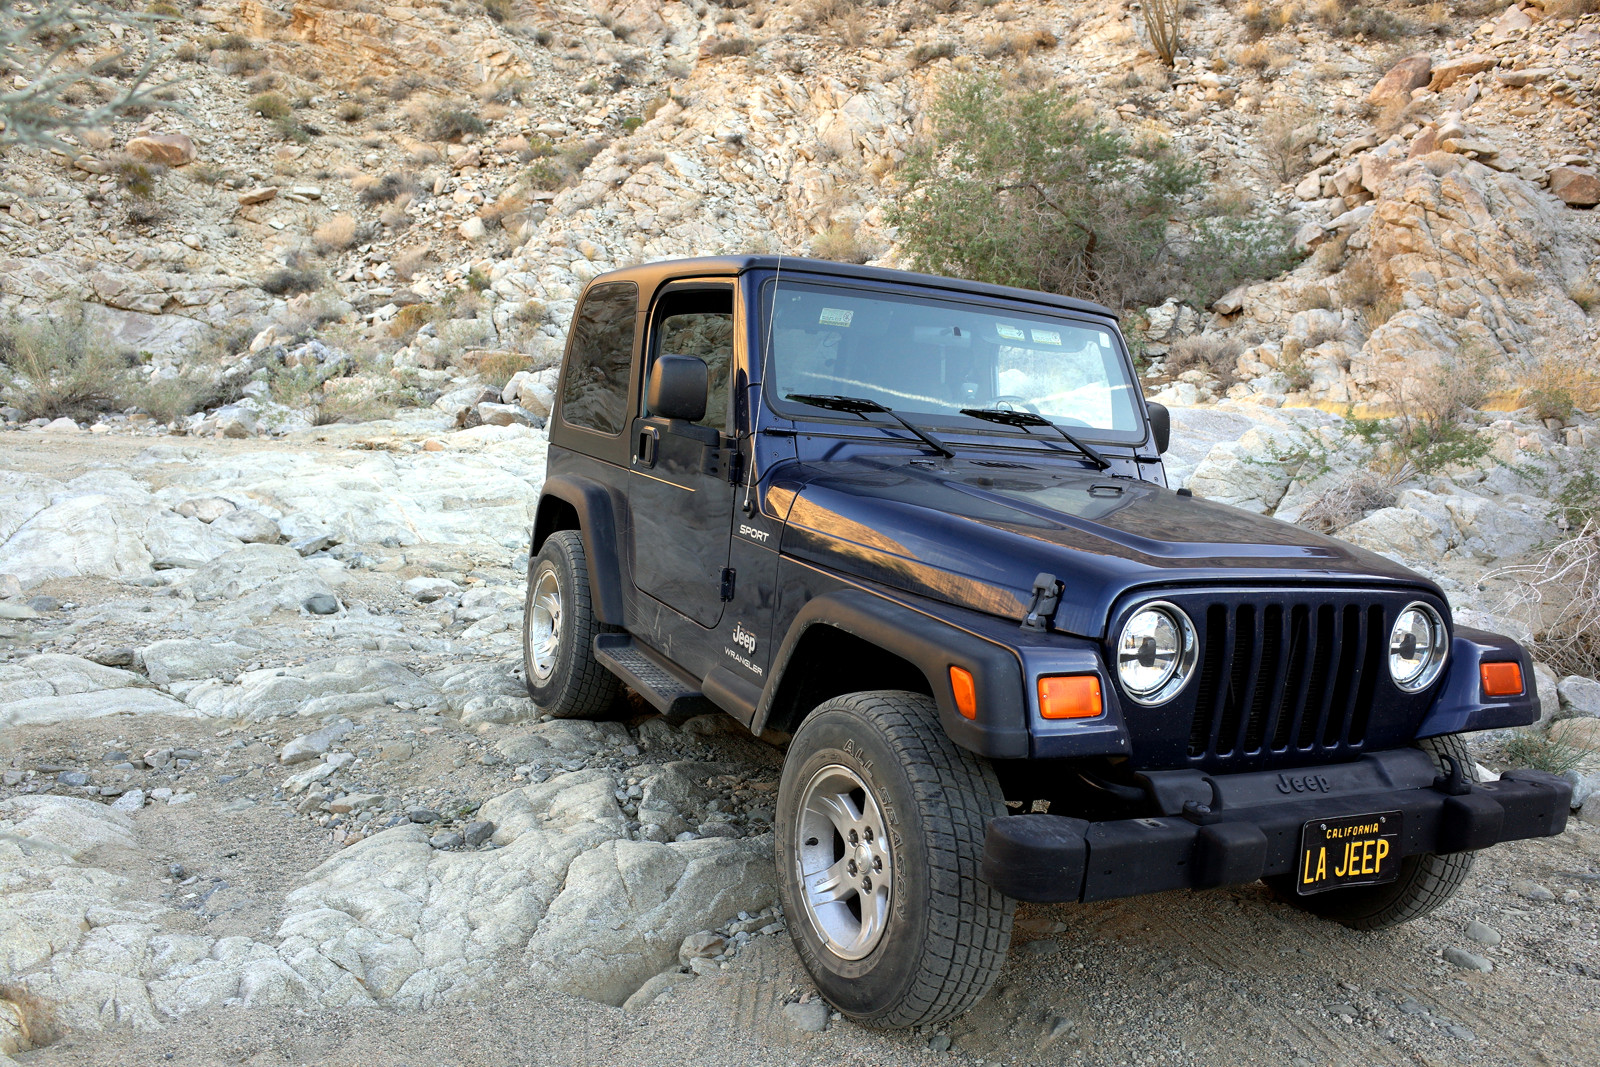 La Jeep straddling the rocky obstacle on Pinkham Canyon in Joshua Tree National Park